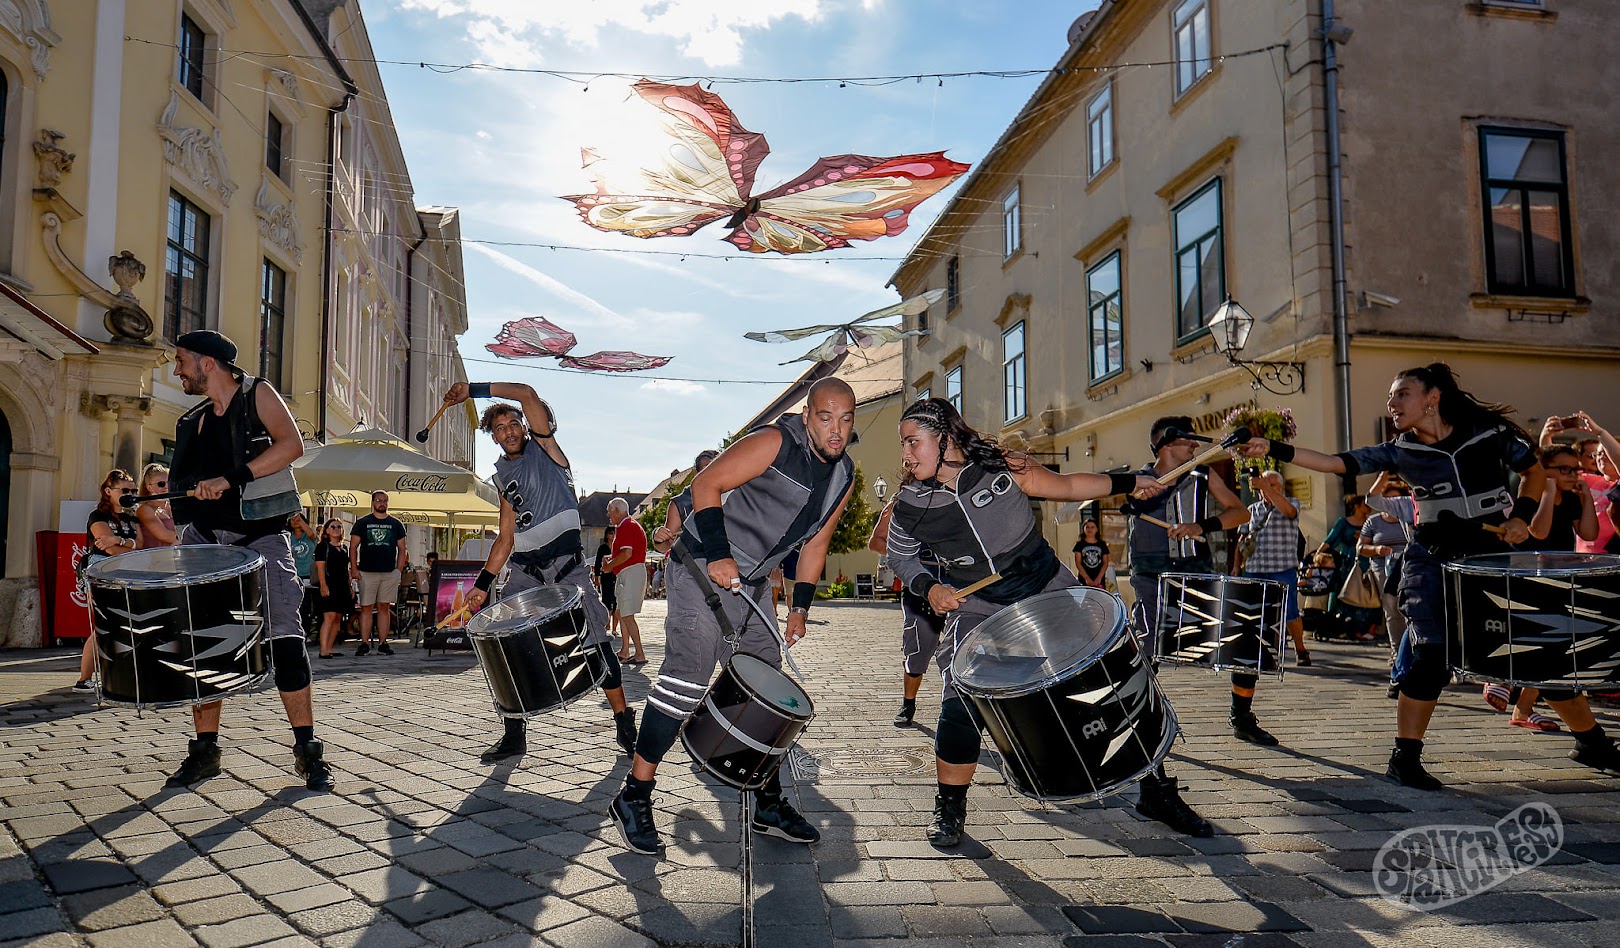 Get ready for the ultimate end-of-summer fun at Špancirfest 